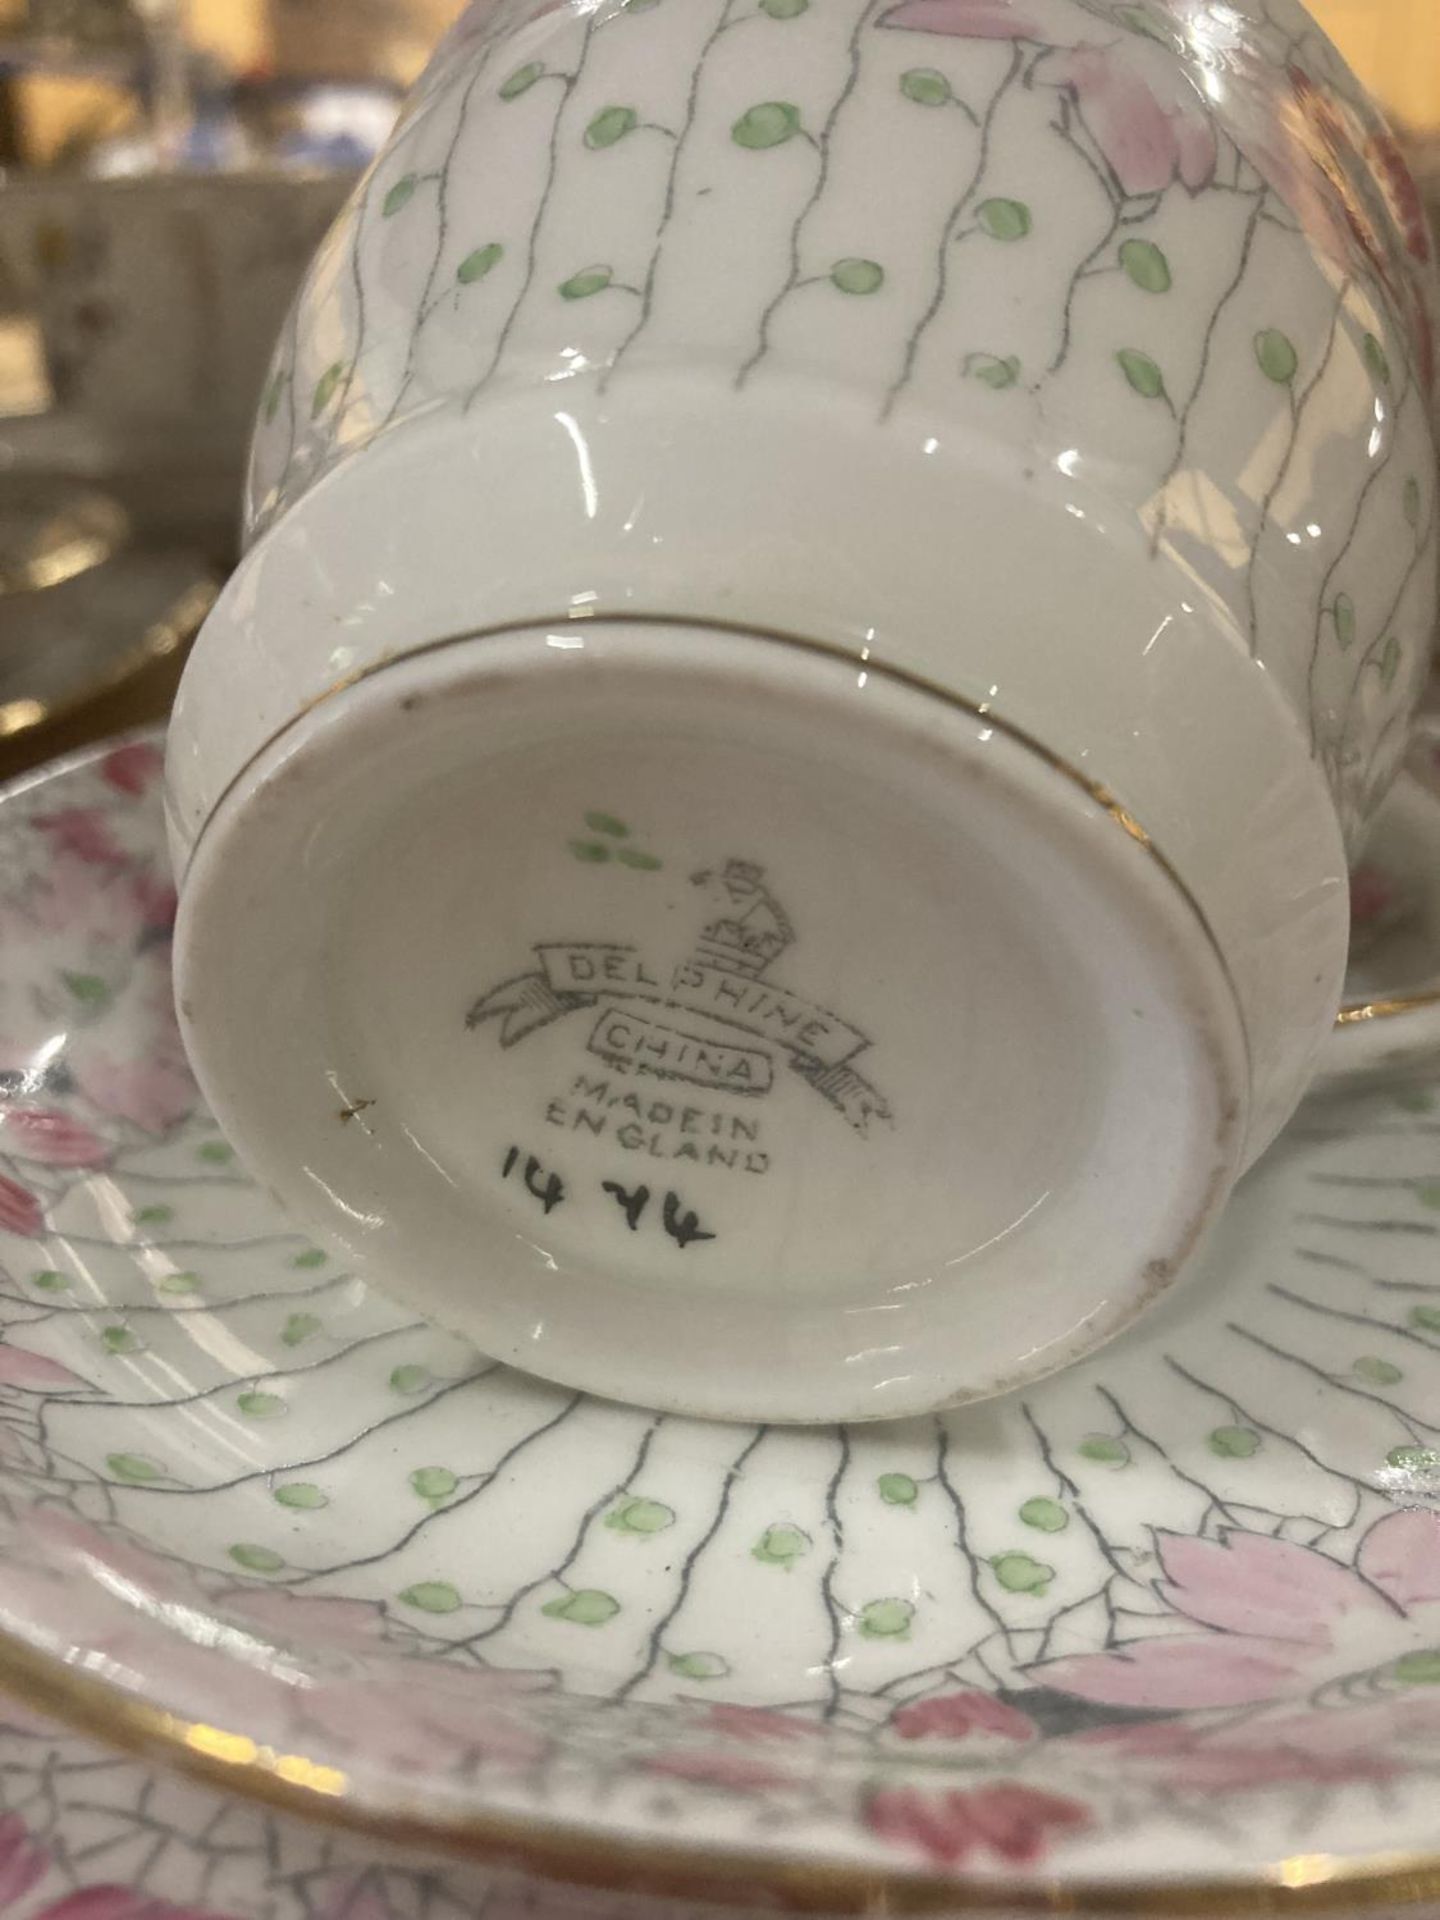 A DELPHINE CHINA TEA AND COFFEE SET IN A PALE PINK FLORAL PATTERN TO INCLUDE A TEA POT, COFFEE - Image 6 of 6